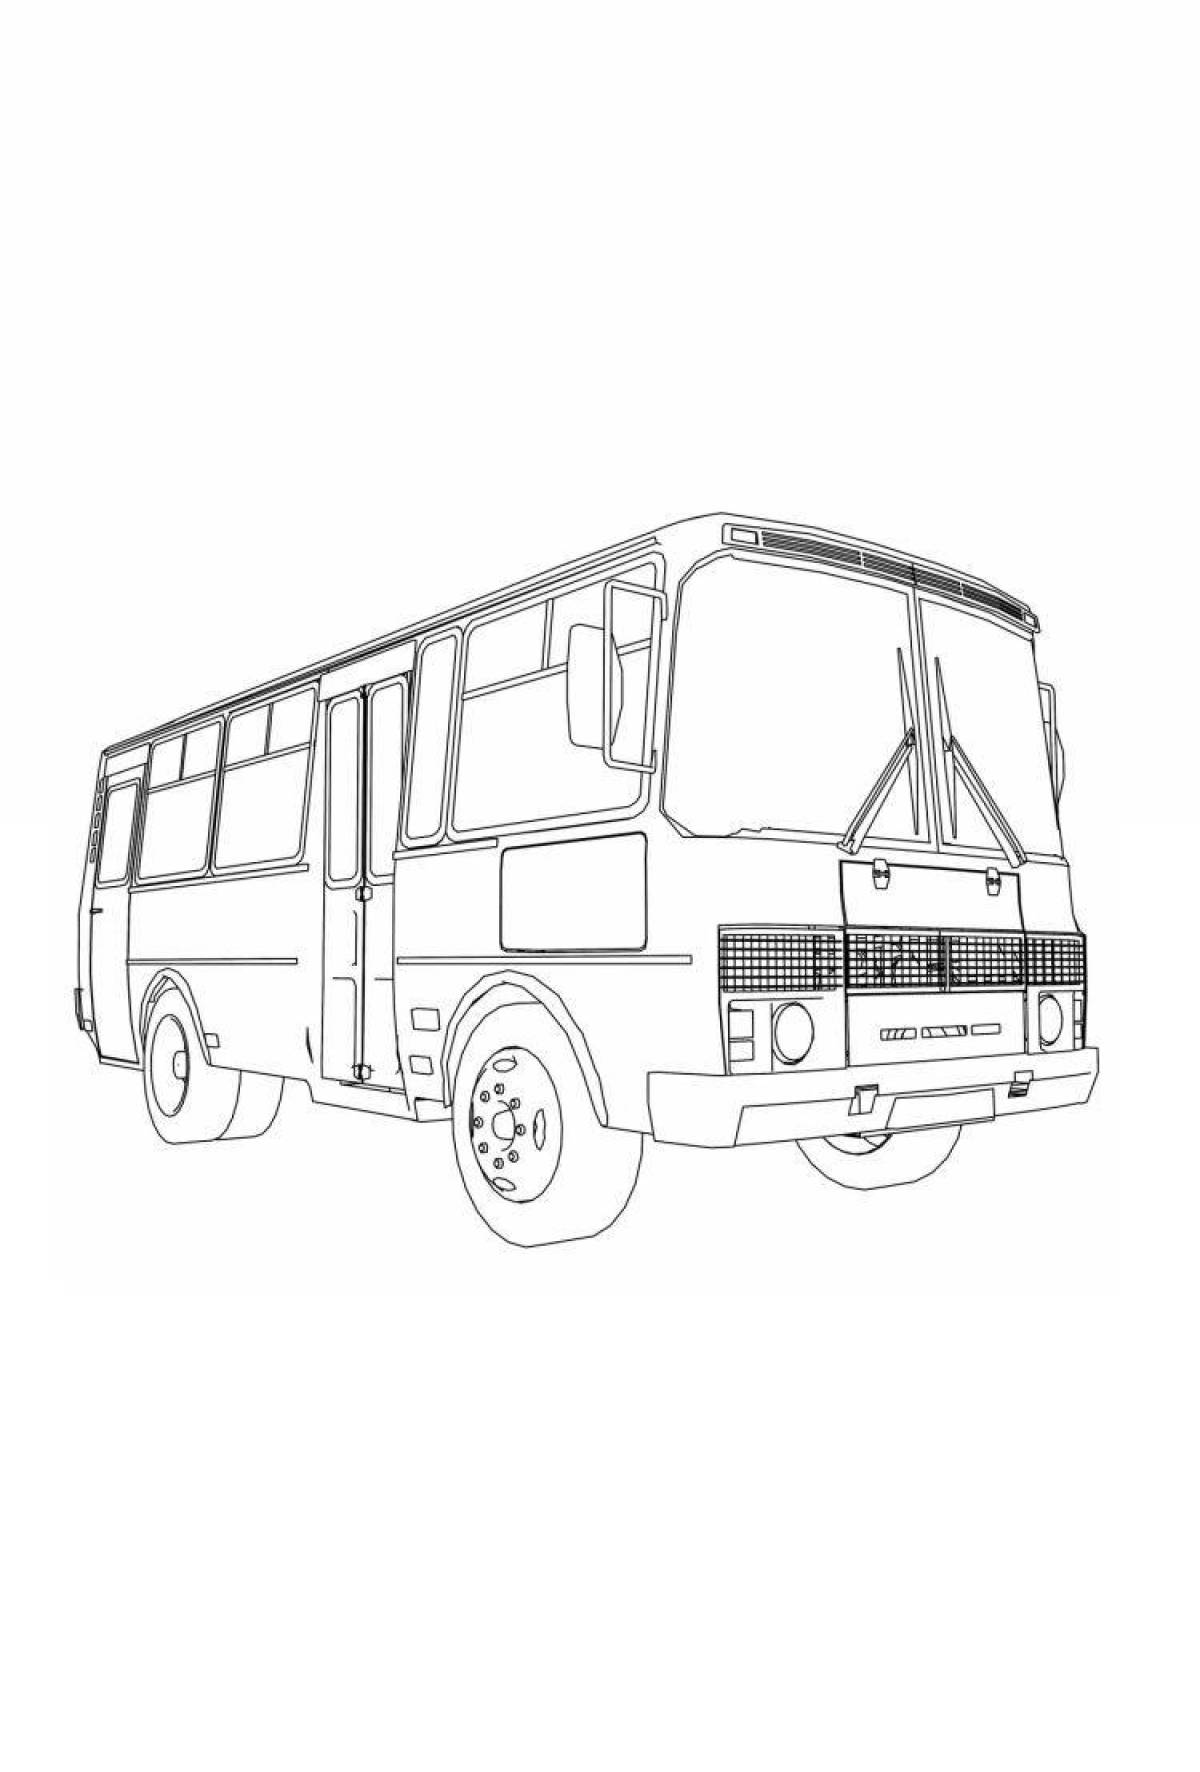 Coloring book glowing bus nefaz